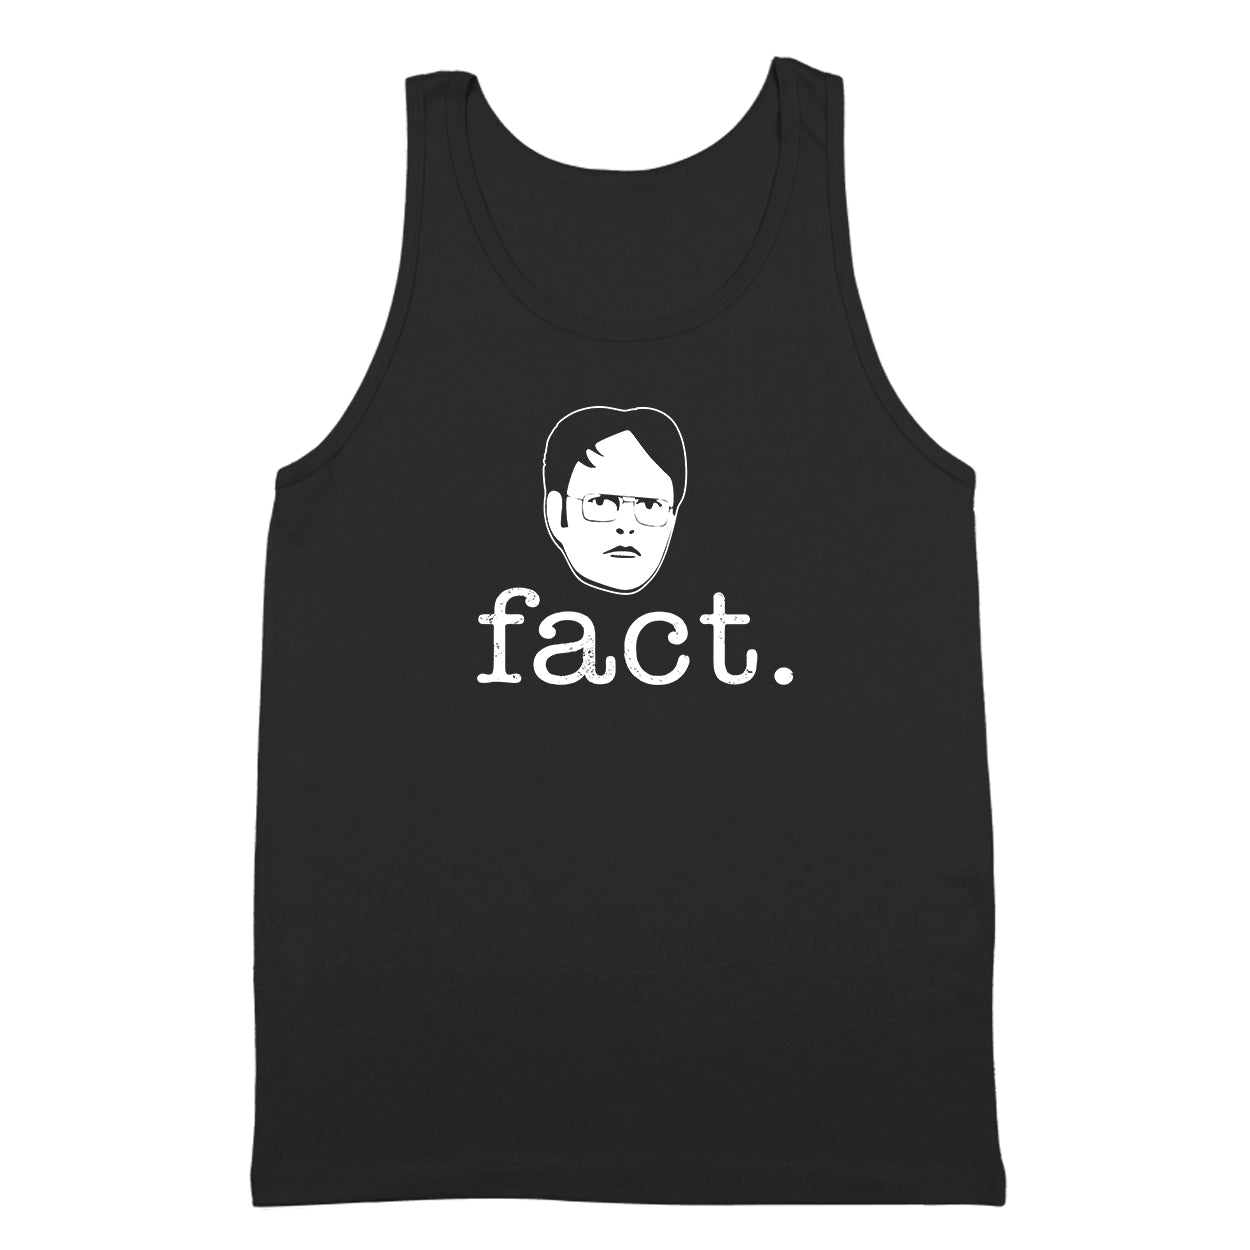 Fact - Dwight Schrute Tshirt - Donkey Tees